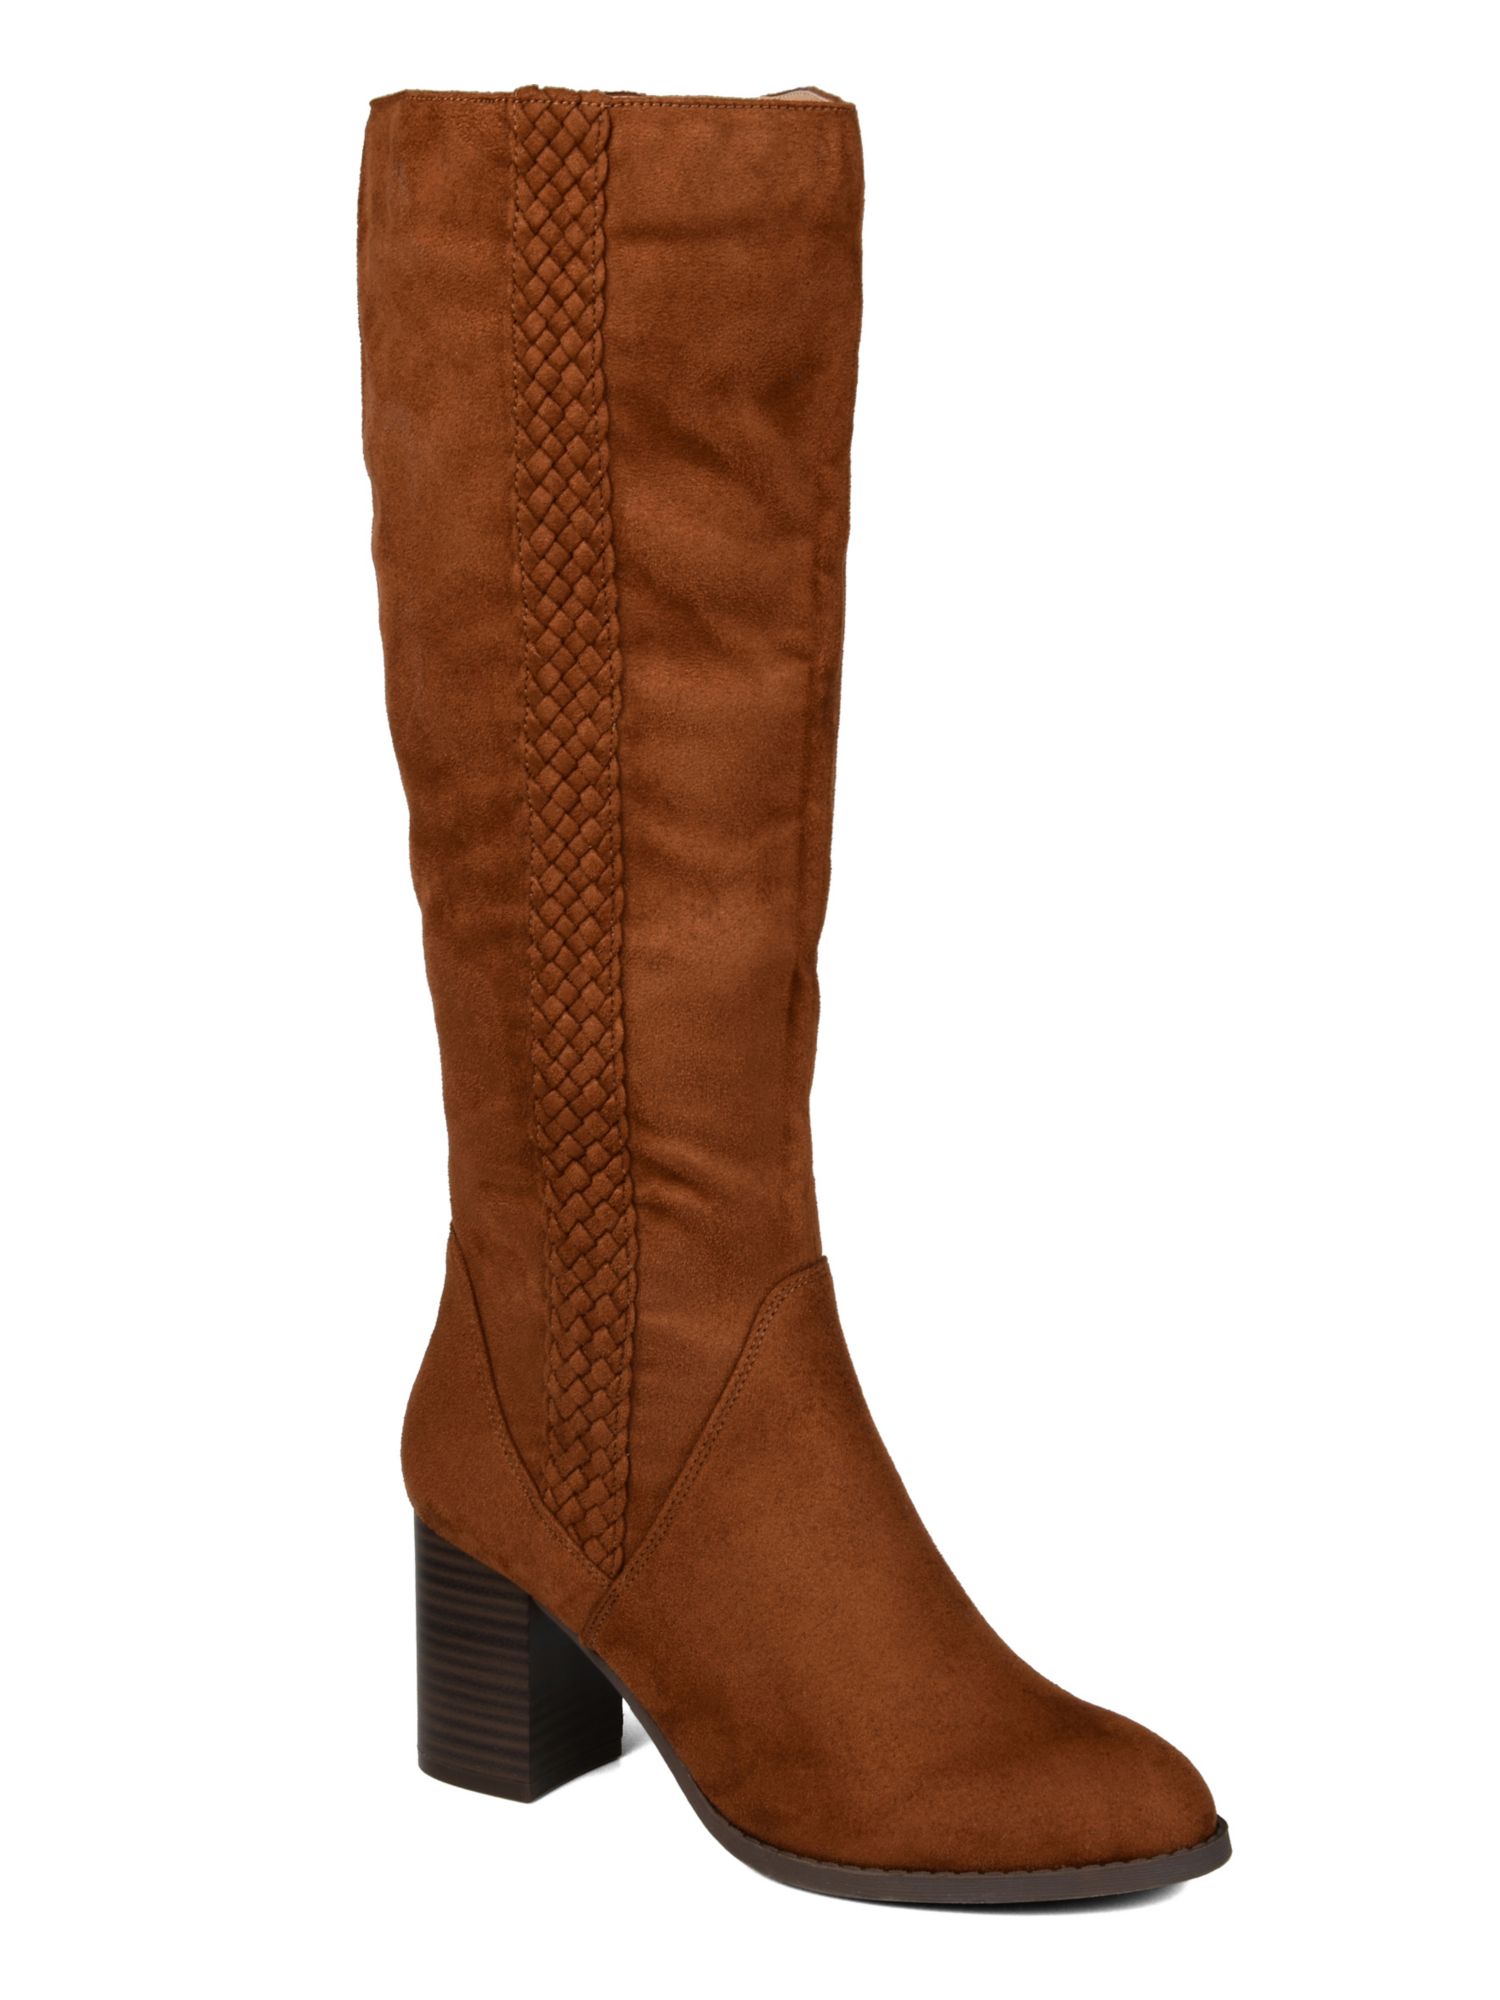 JOURNEE COLLECTION Womens Brown Braided Side Strip Extra Wide Calf Almond Toe Stacked Heel Zip-Up Heeled Boots 5.5